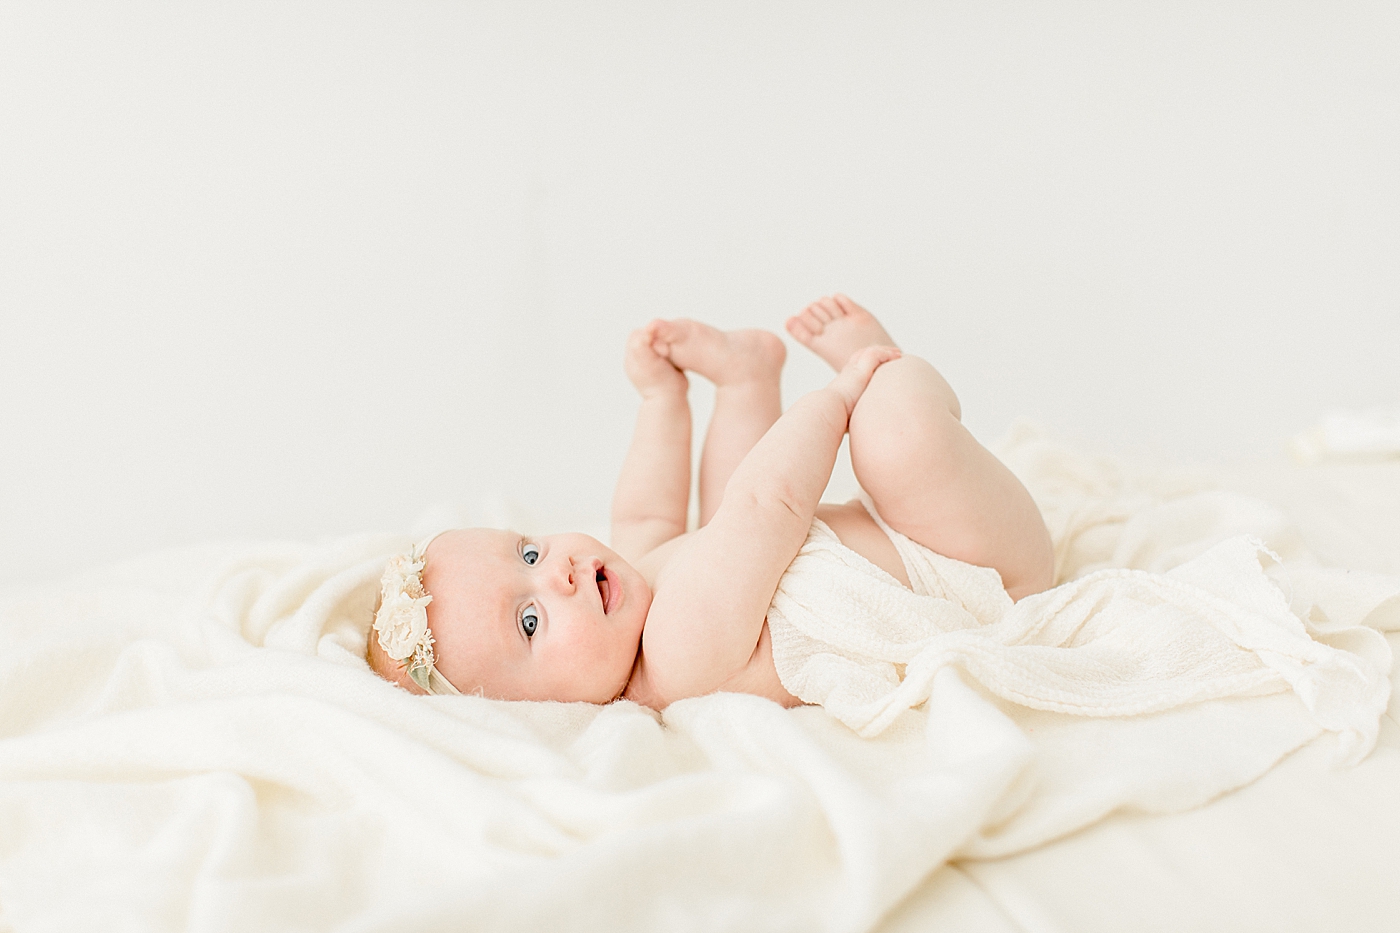 Baby grabbing her toes during milestone photoshoot with Brittany Elise Photography.